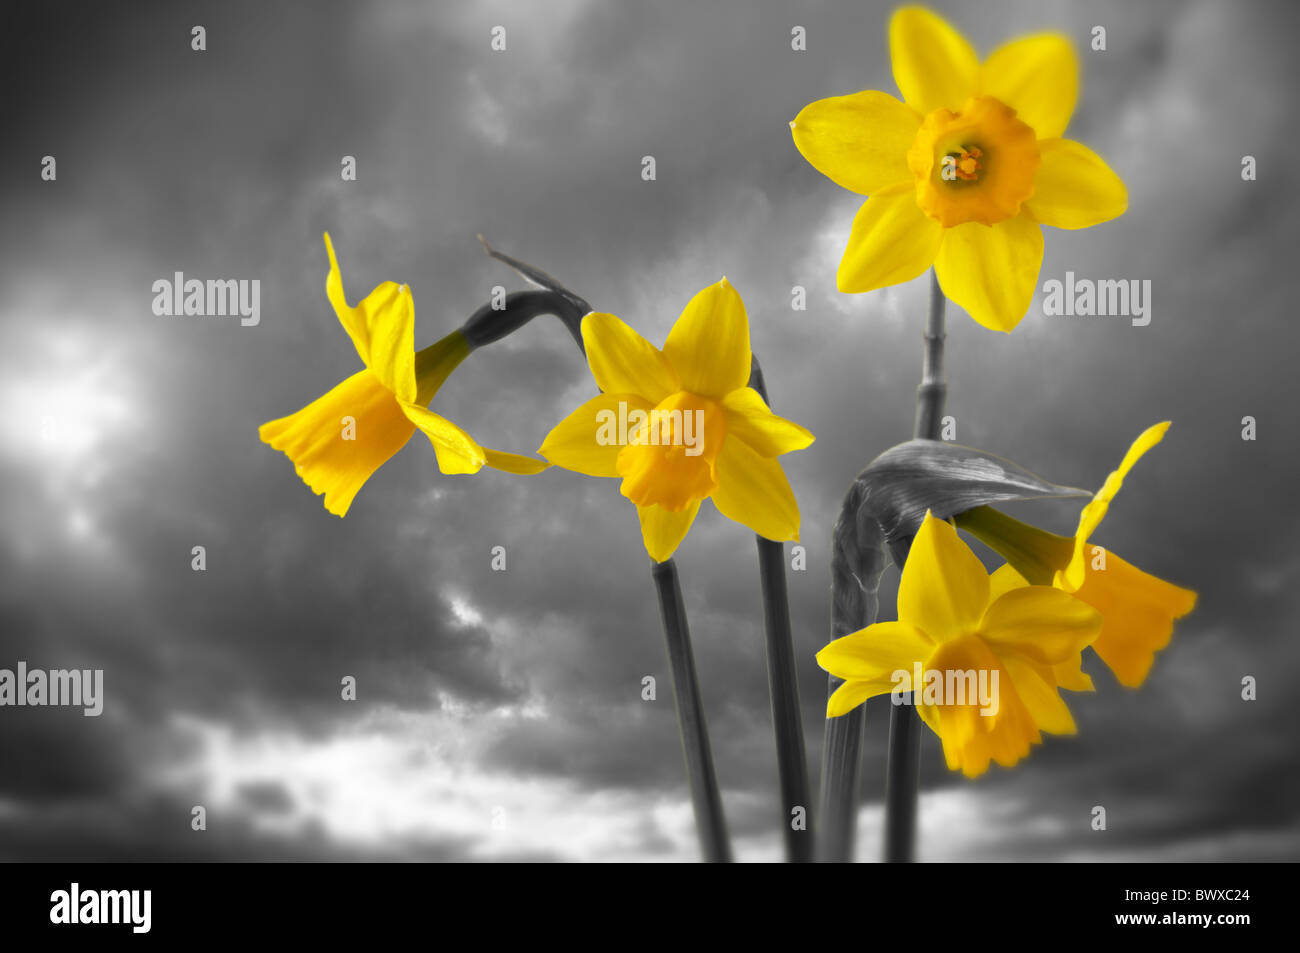 Spring daffodils flowering Stock Photo